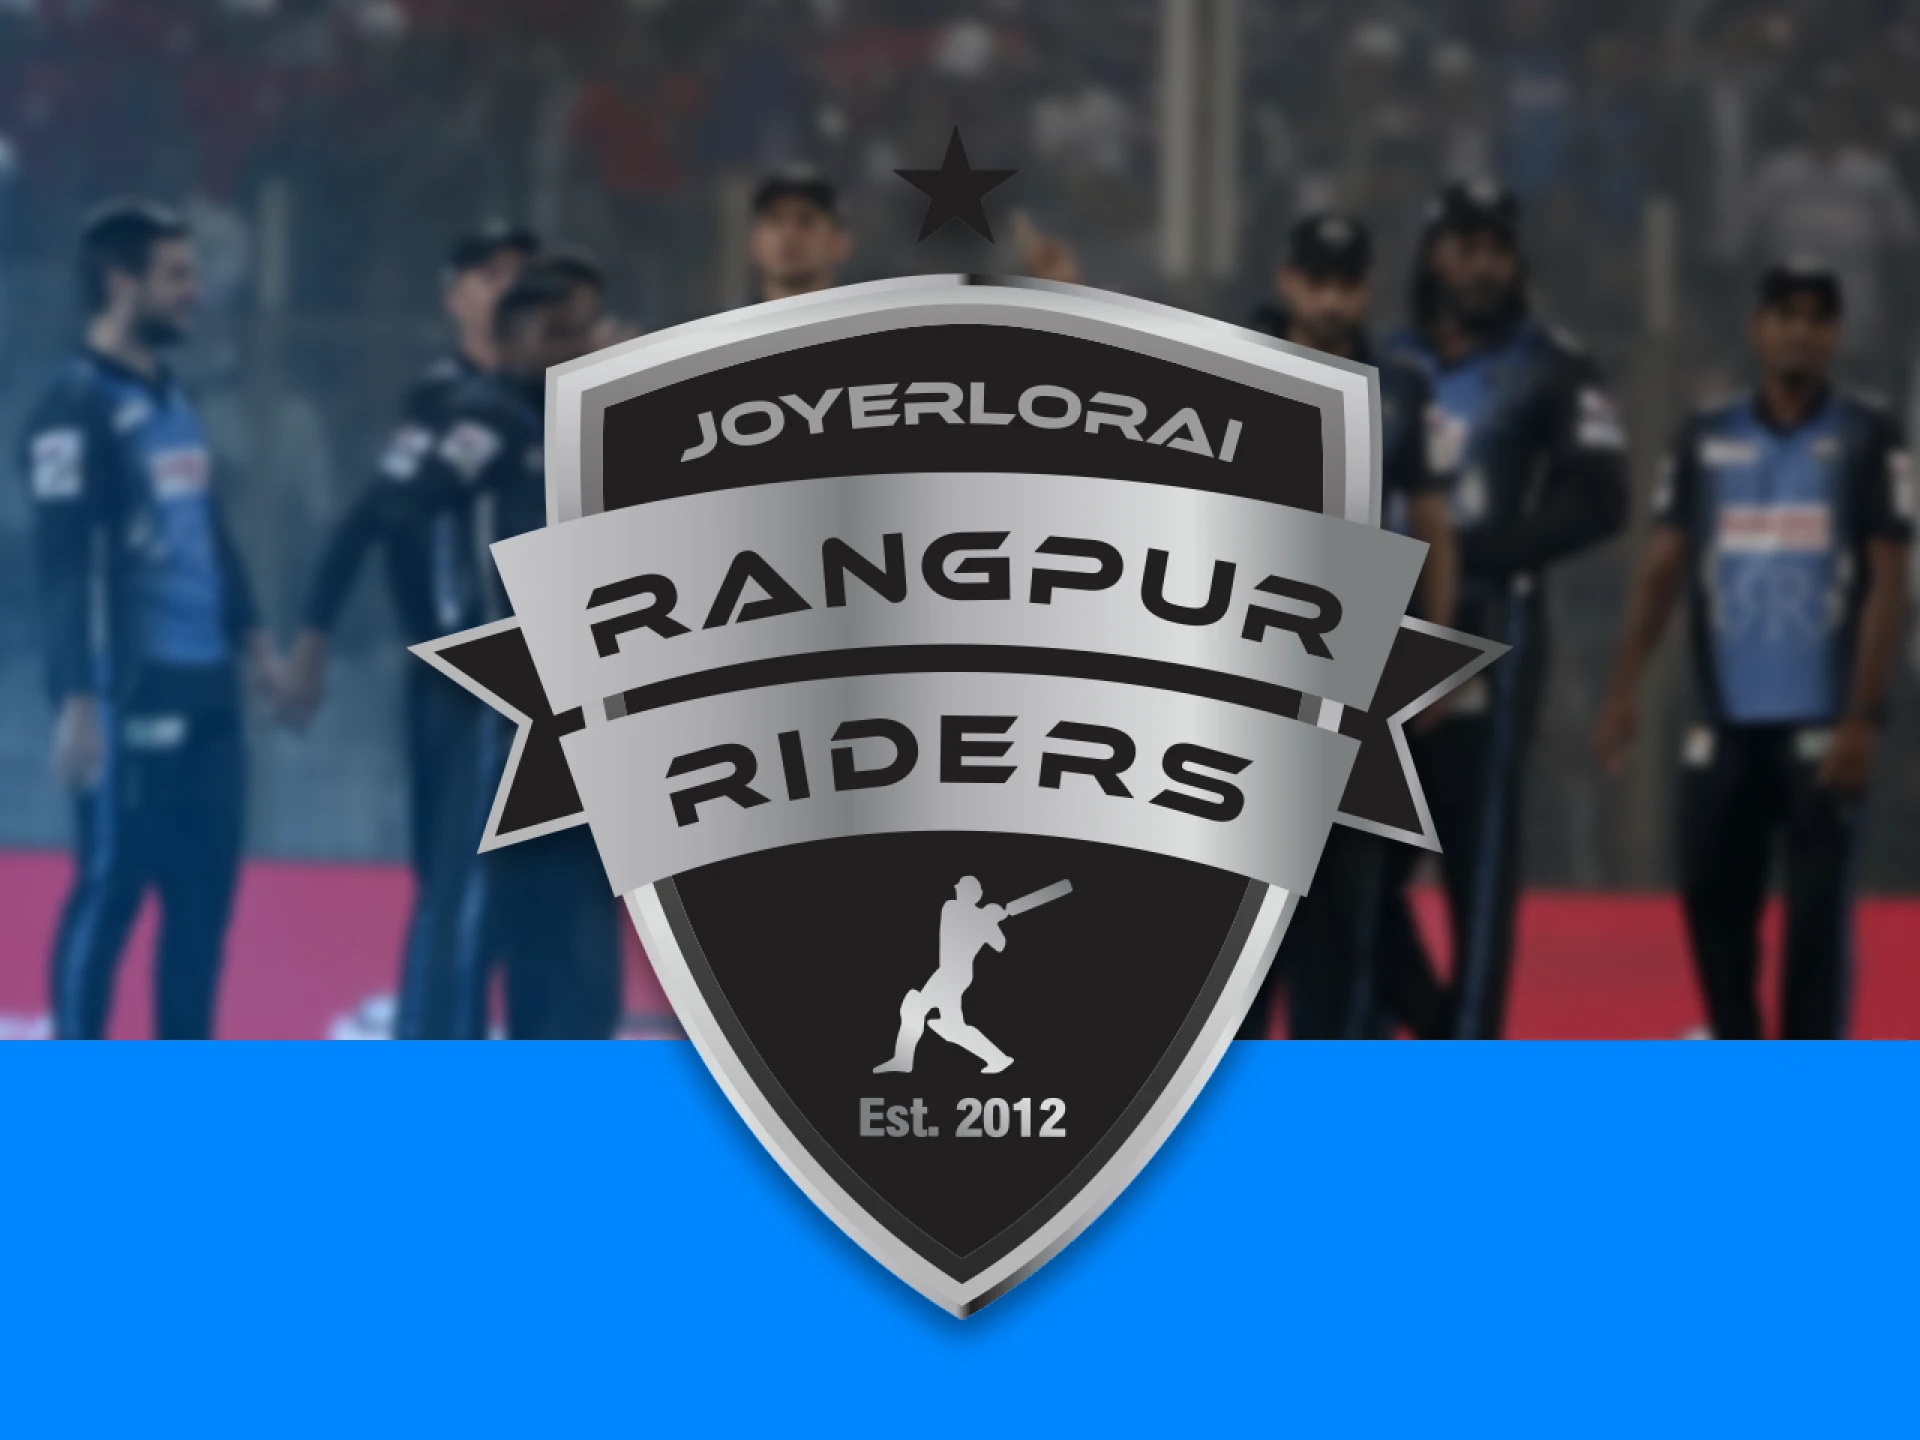 Rangpur Riders is a team that joined the league in 2013.